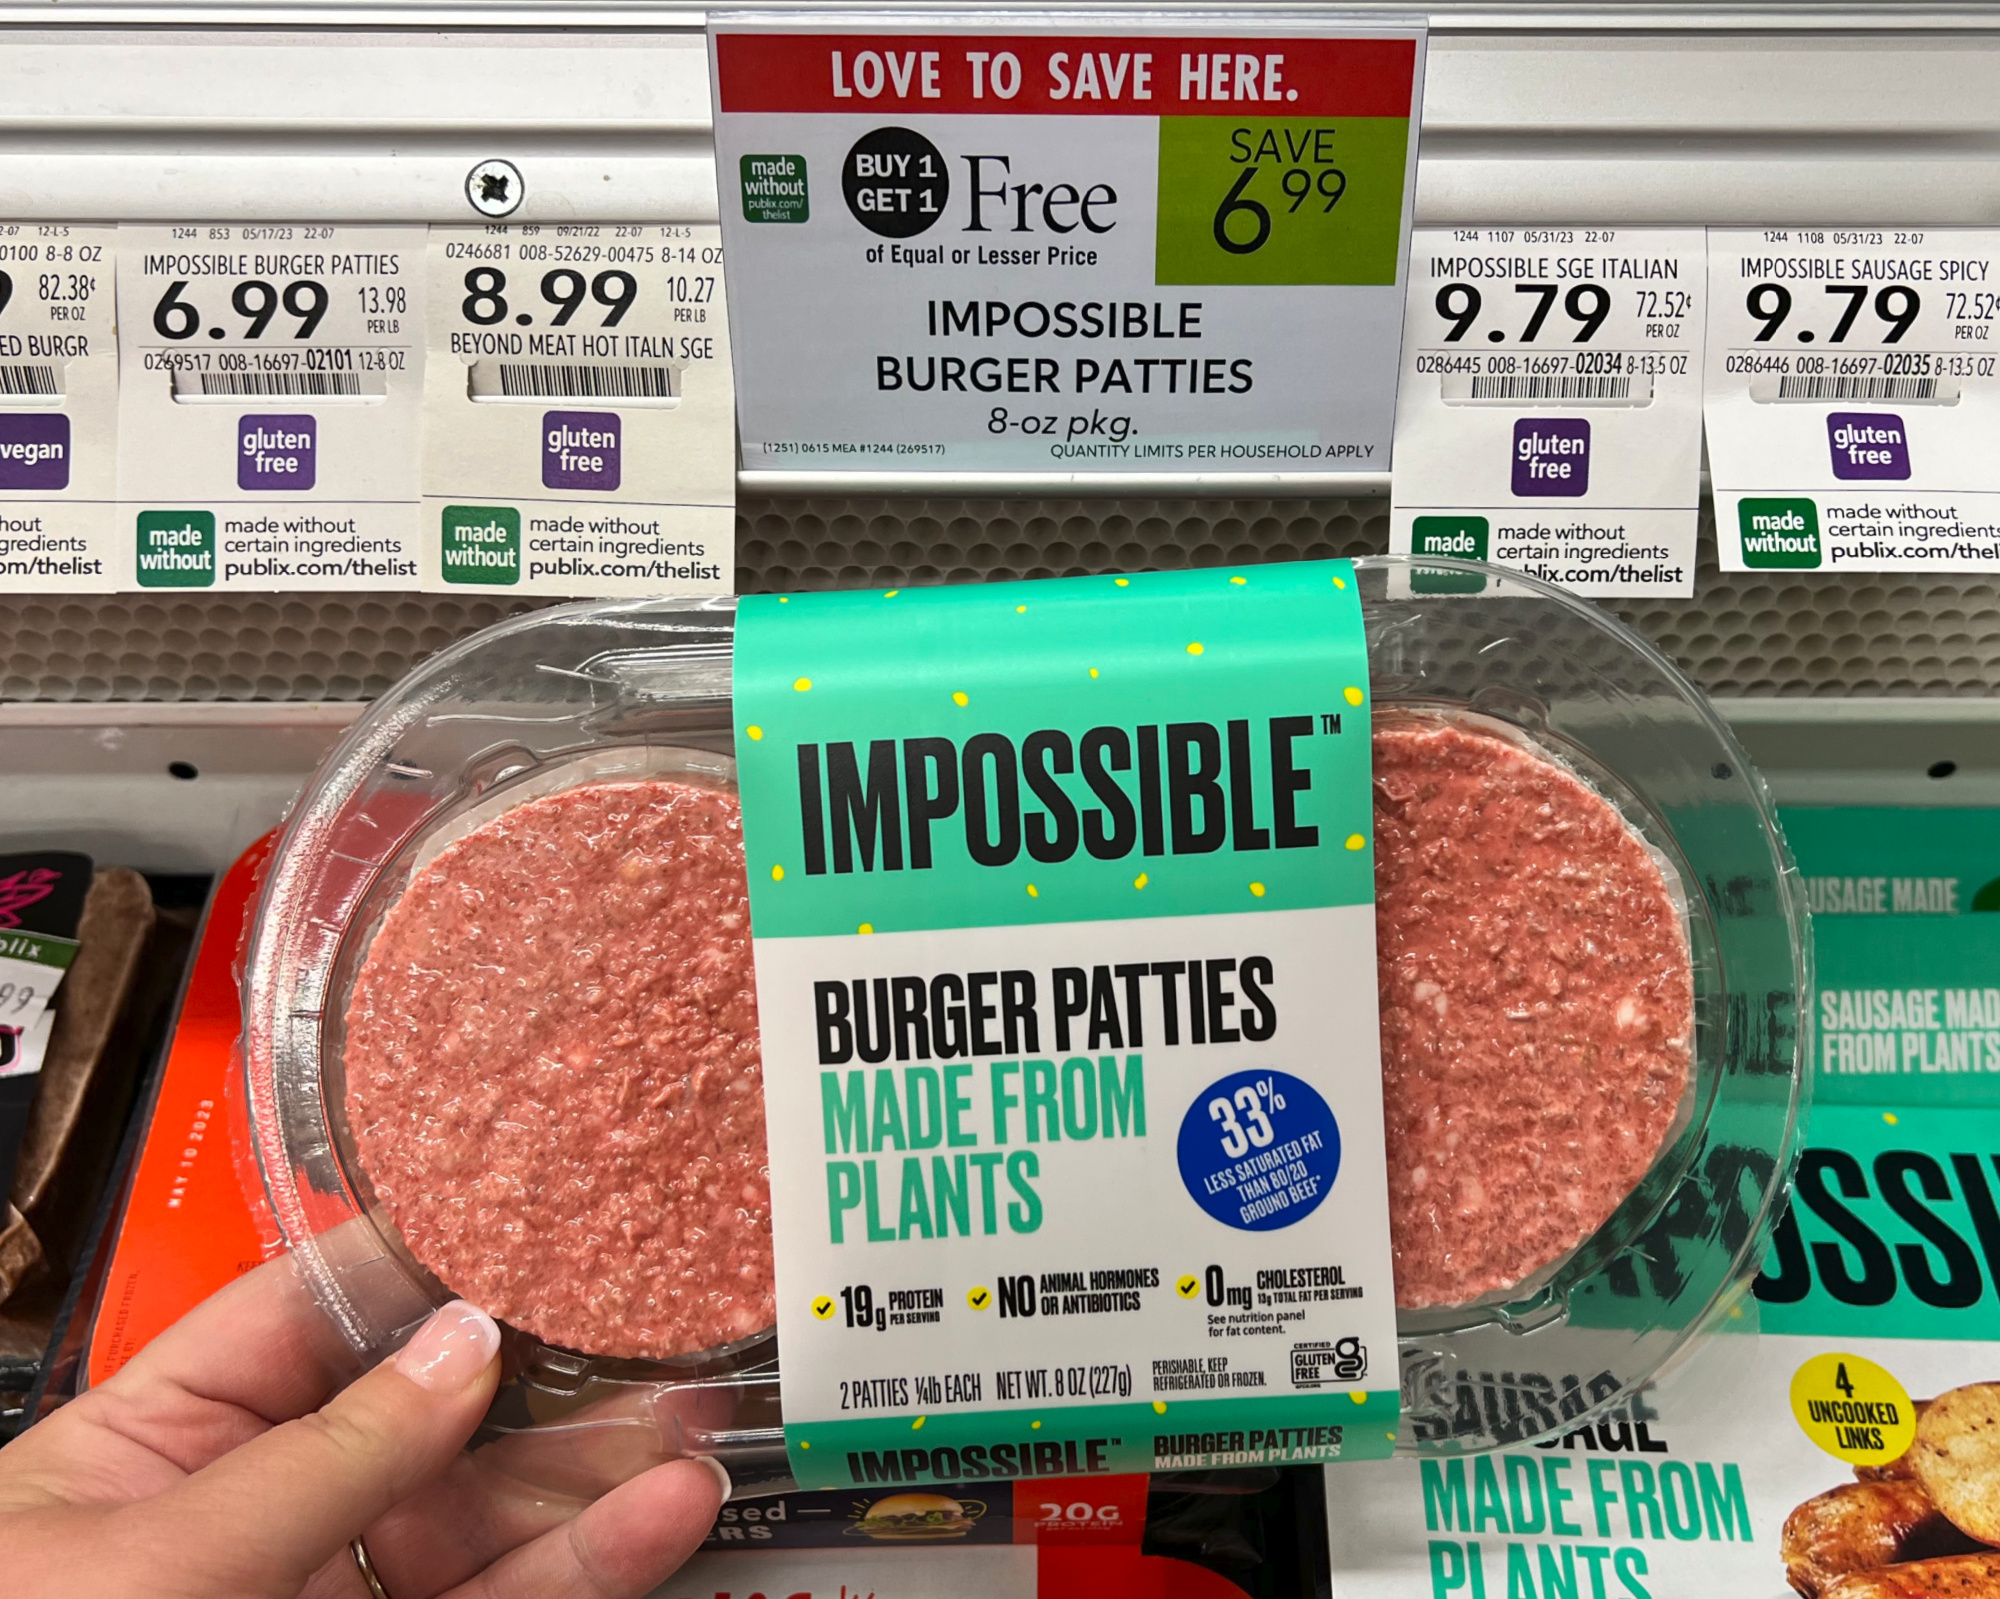 Impossible Burger Patties As Low As 250 At Publix Regular Price 699 Iheartpublix 